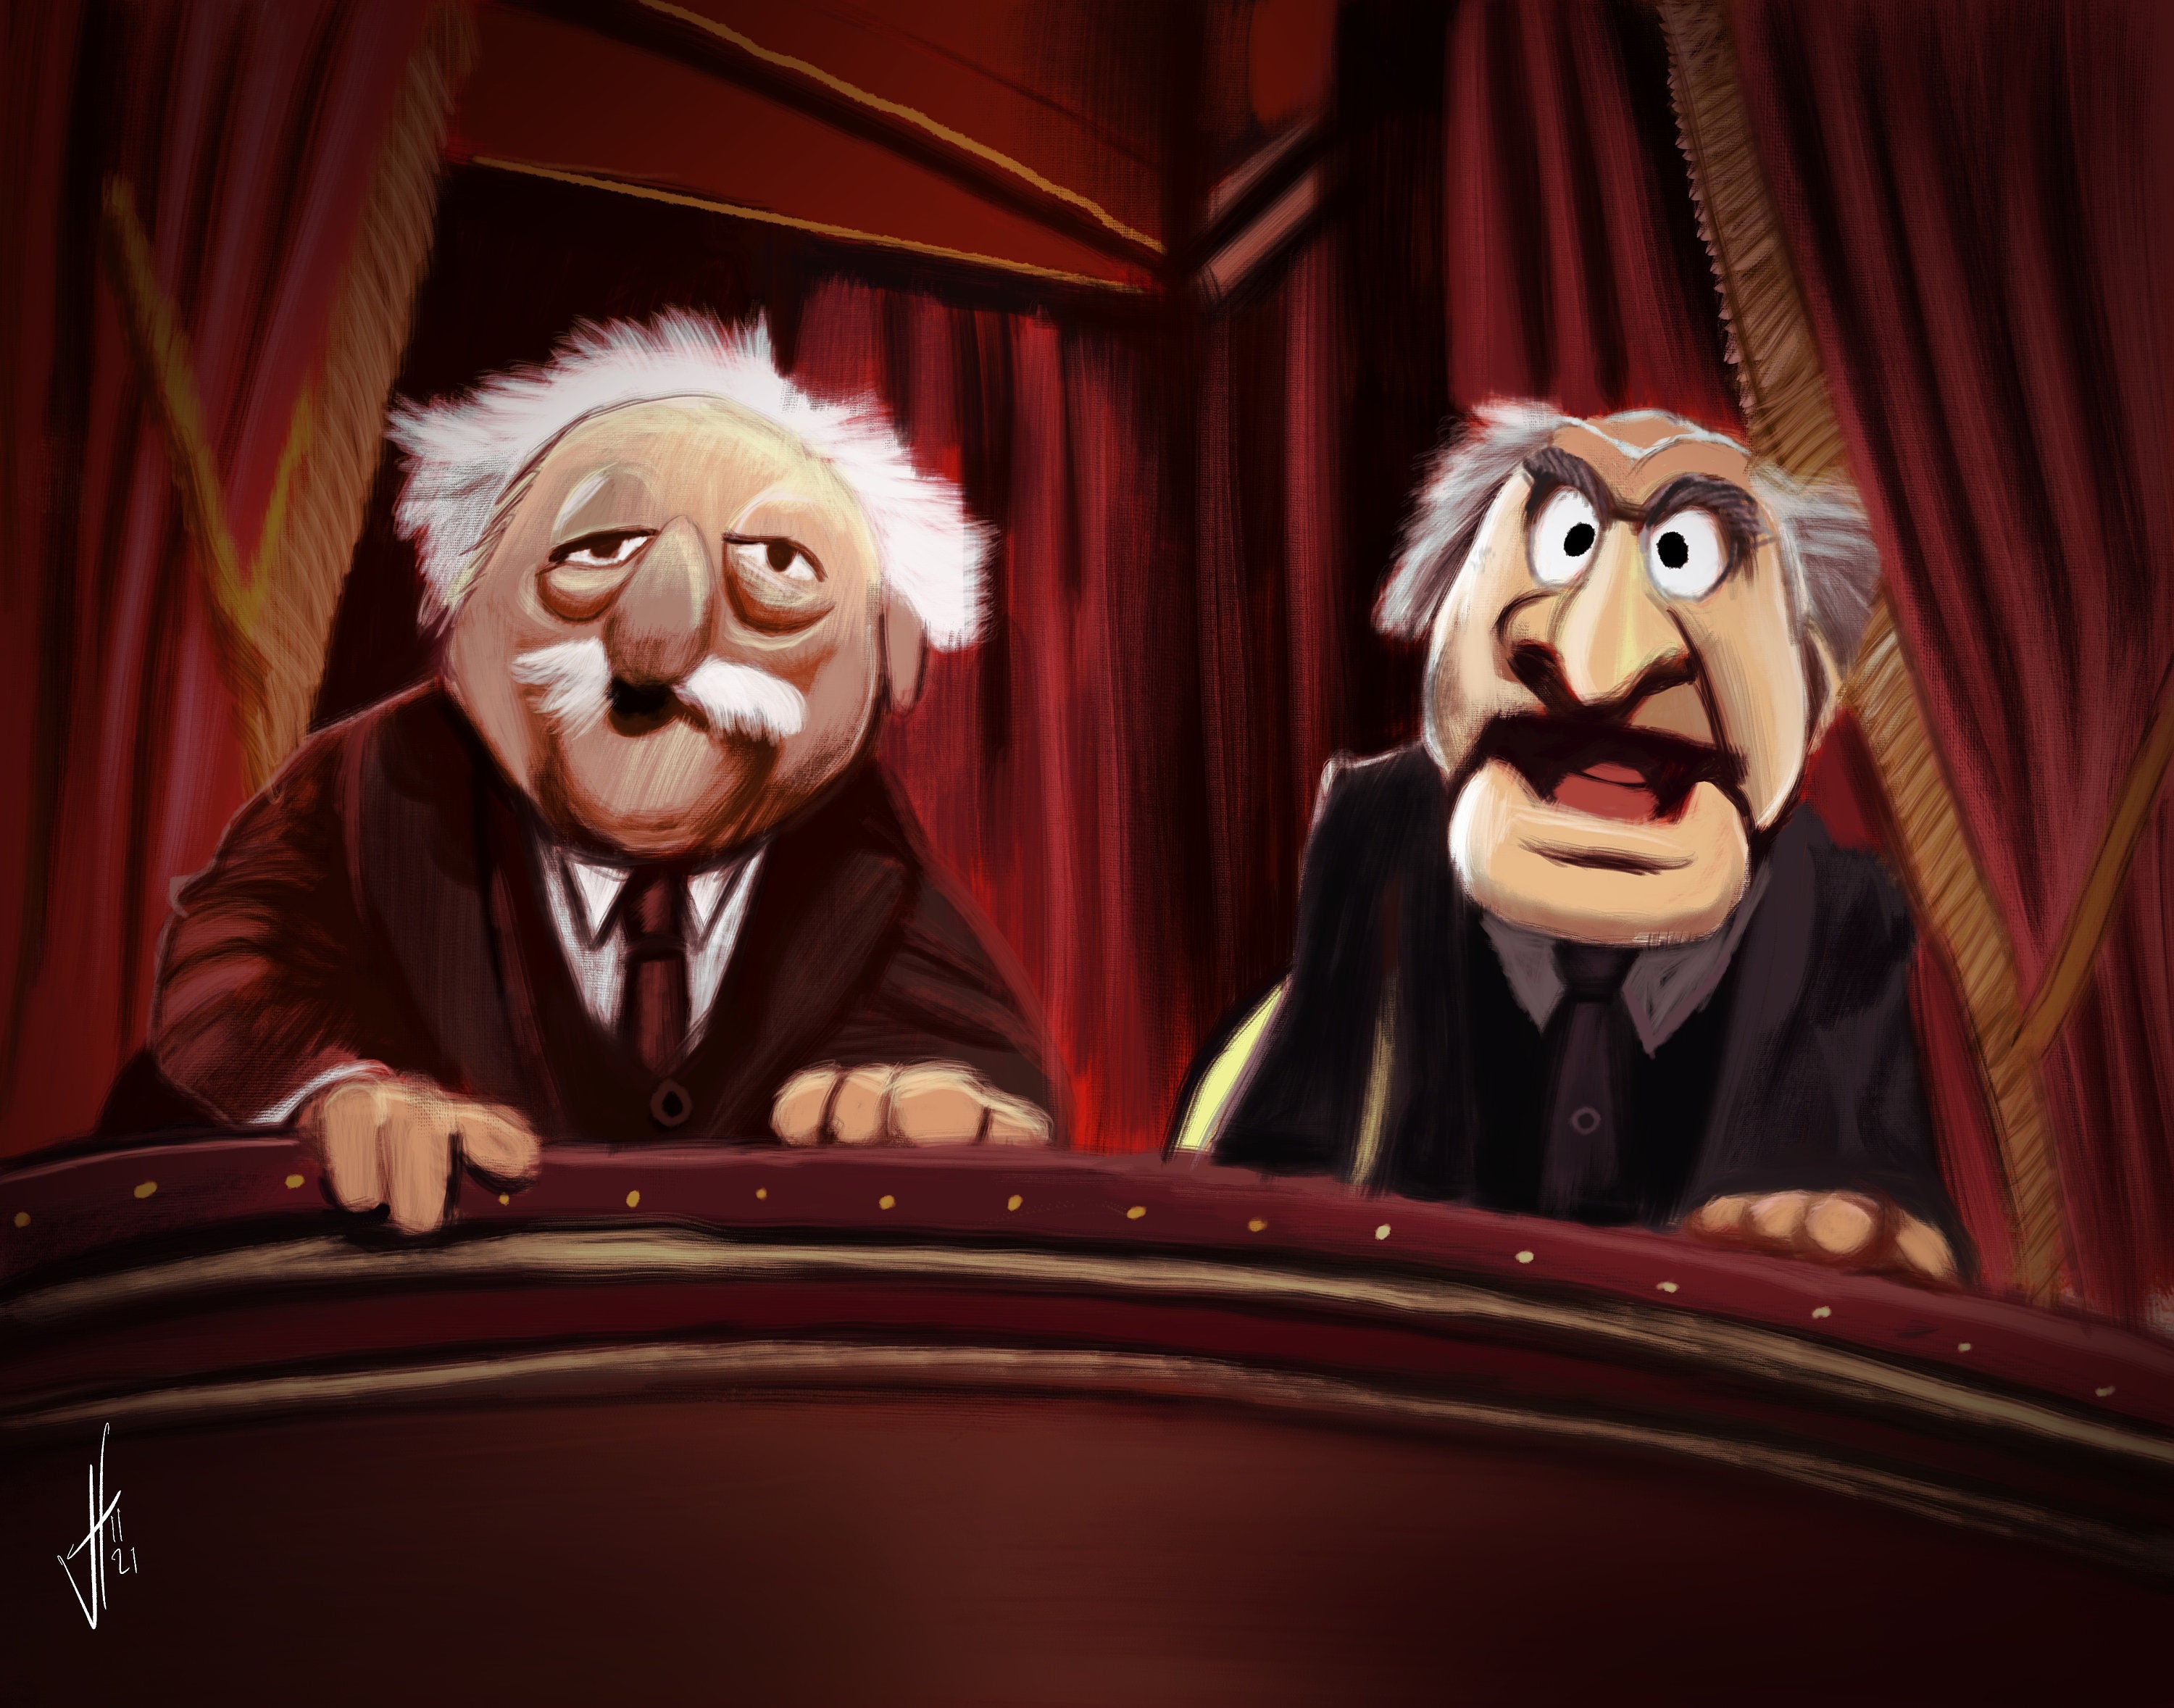 Statler and Waldorf Portrait Print The Muppets